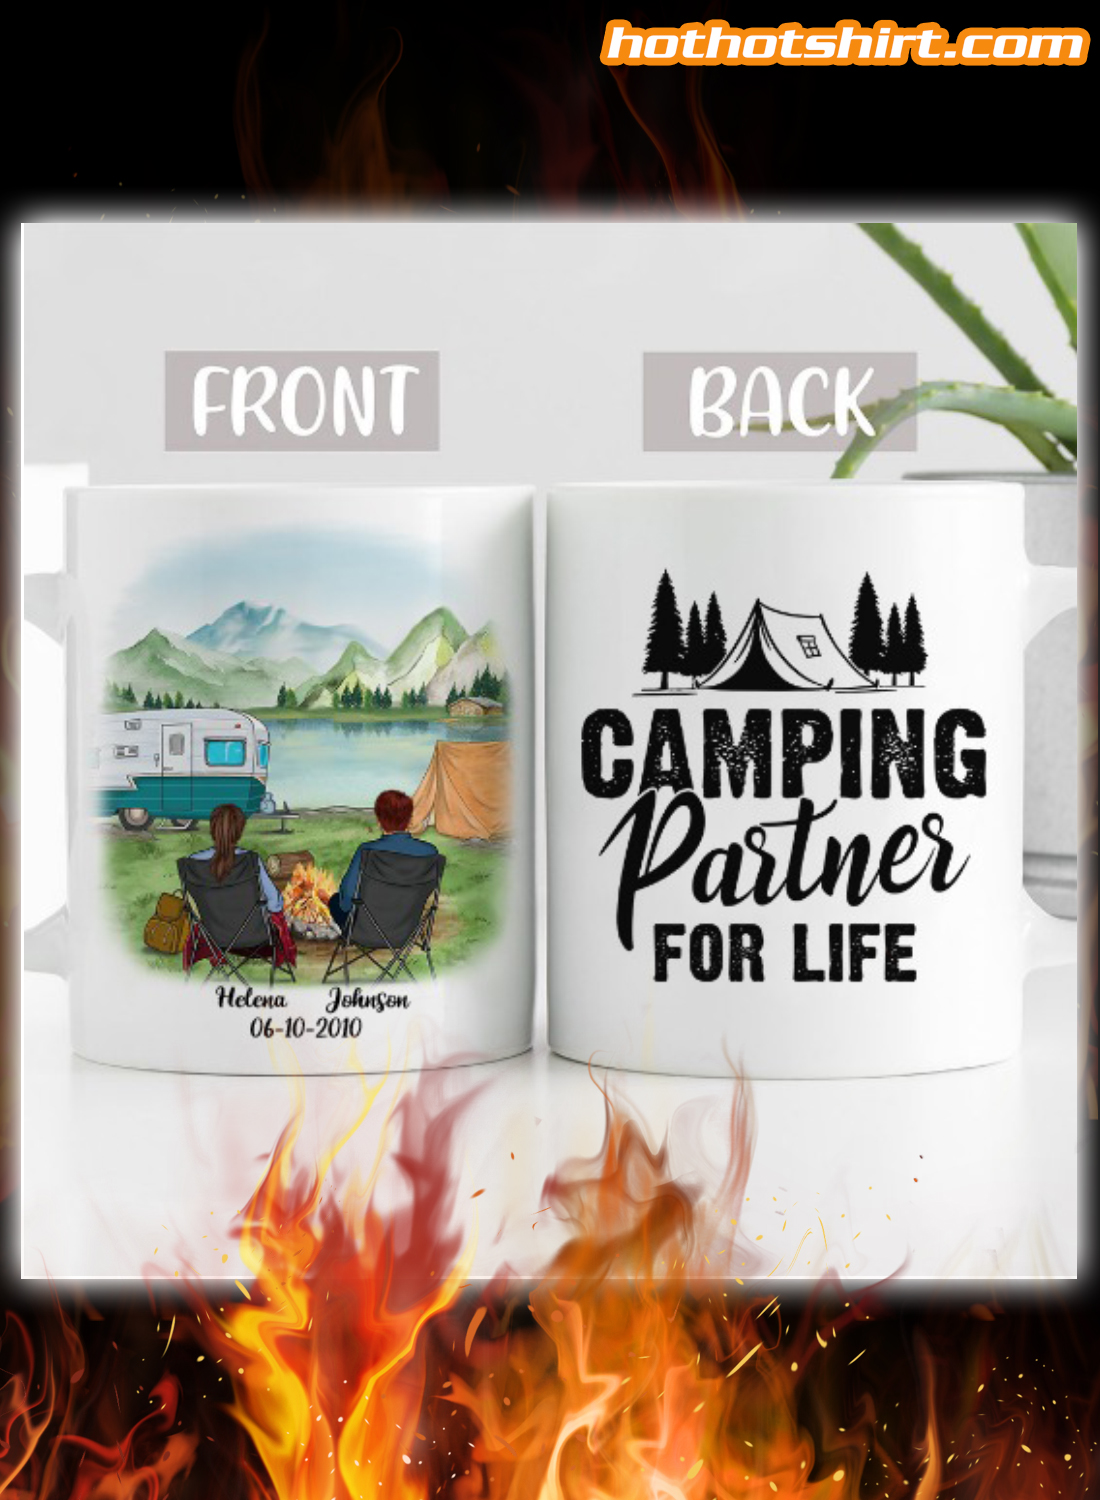 Personalized Custommize Camping Partner for Life Couple Mug